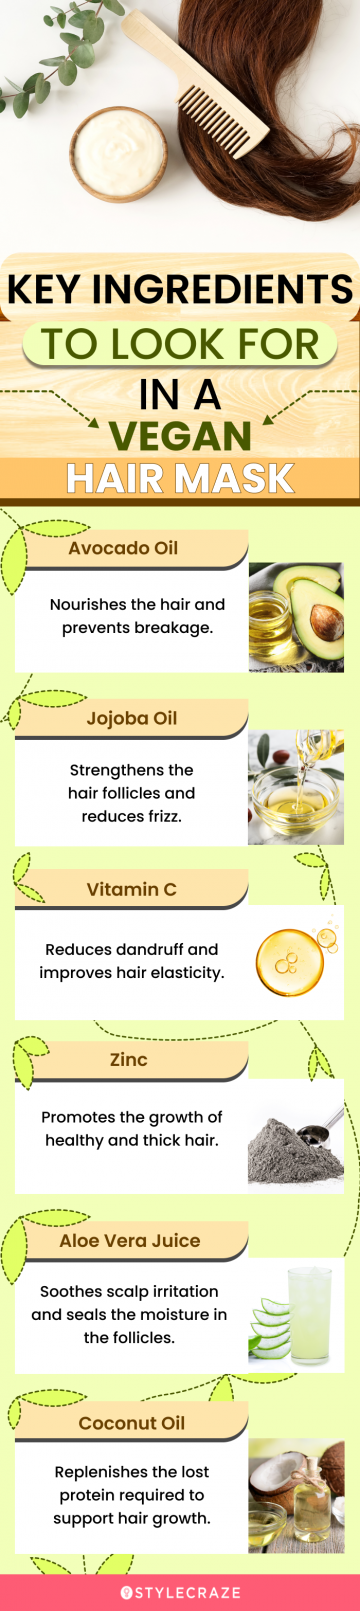 Key Ingredients To Look For In A Vegan Hair Mask (infographic)